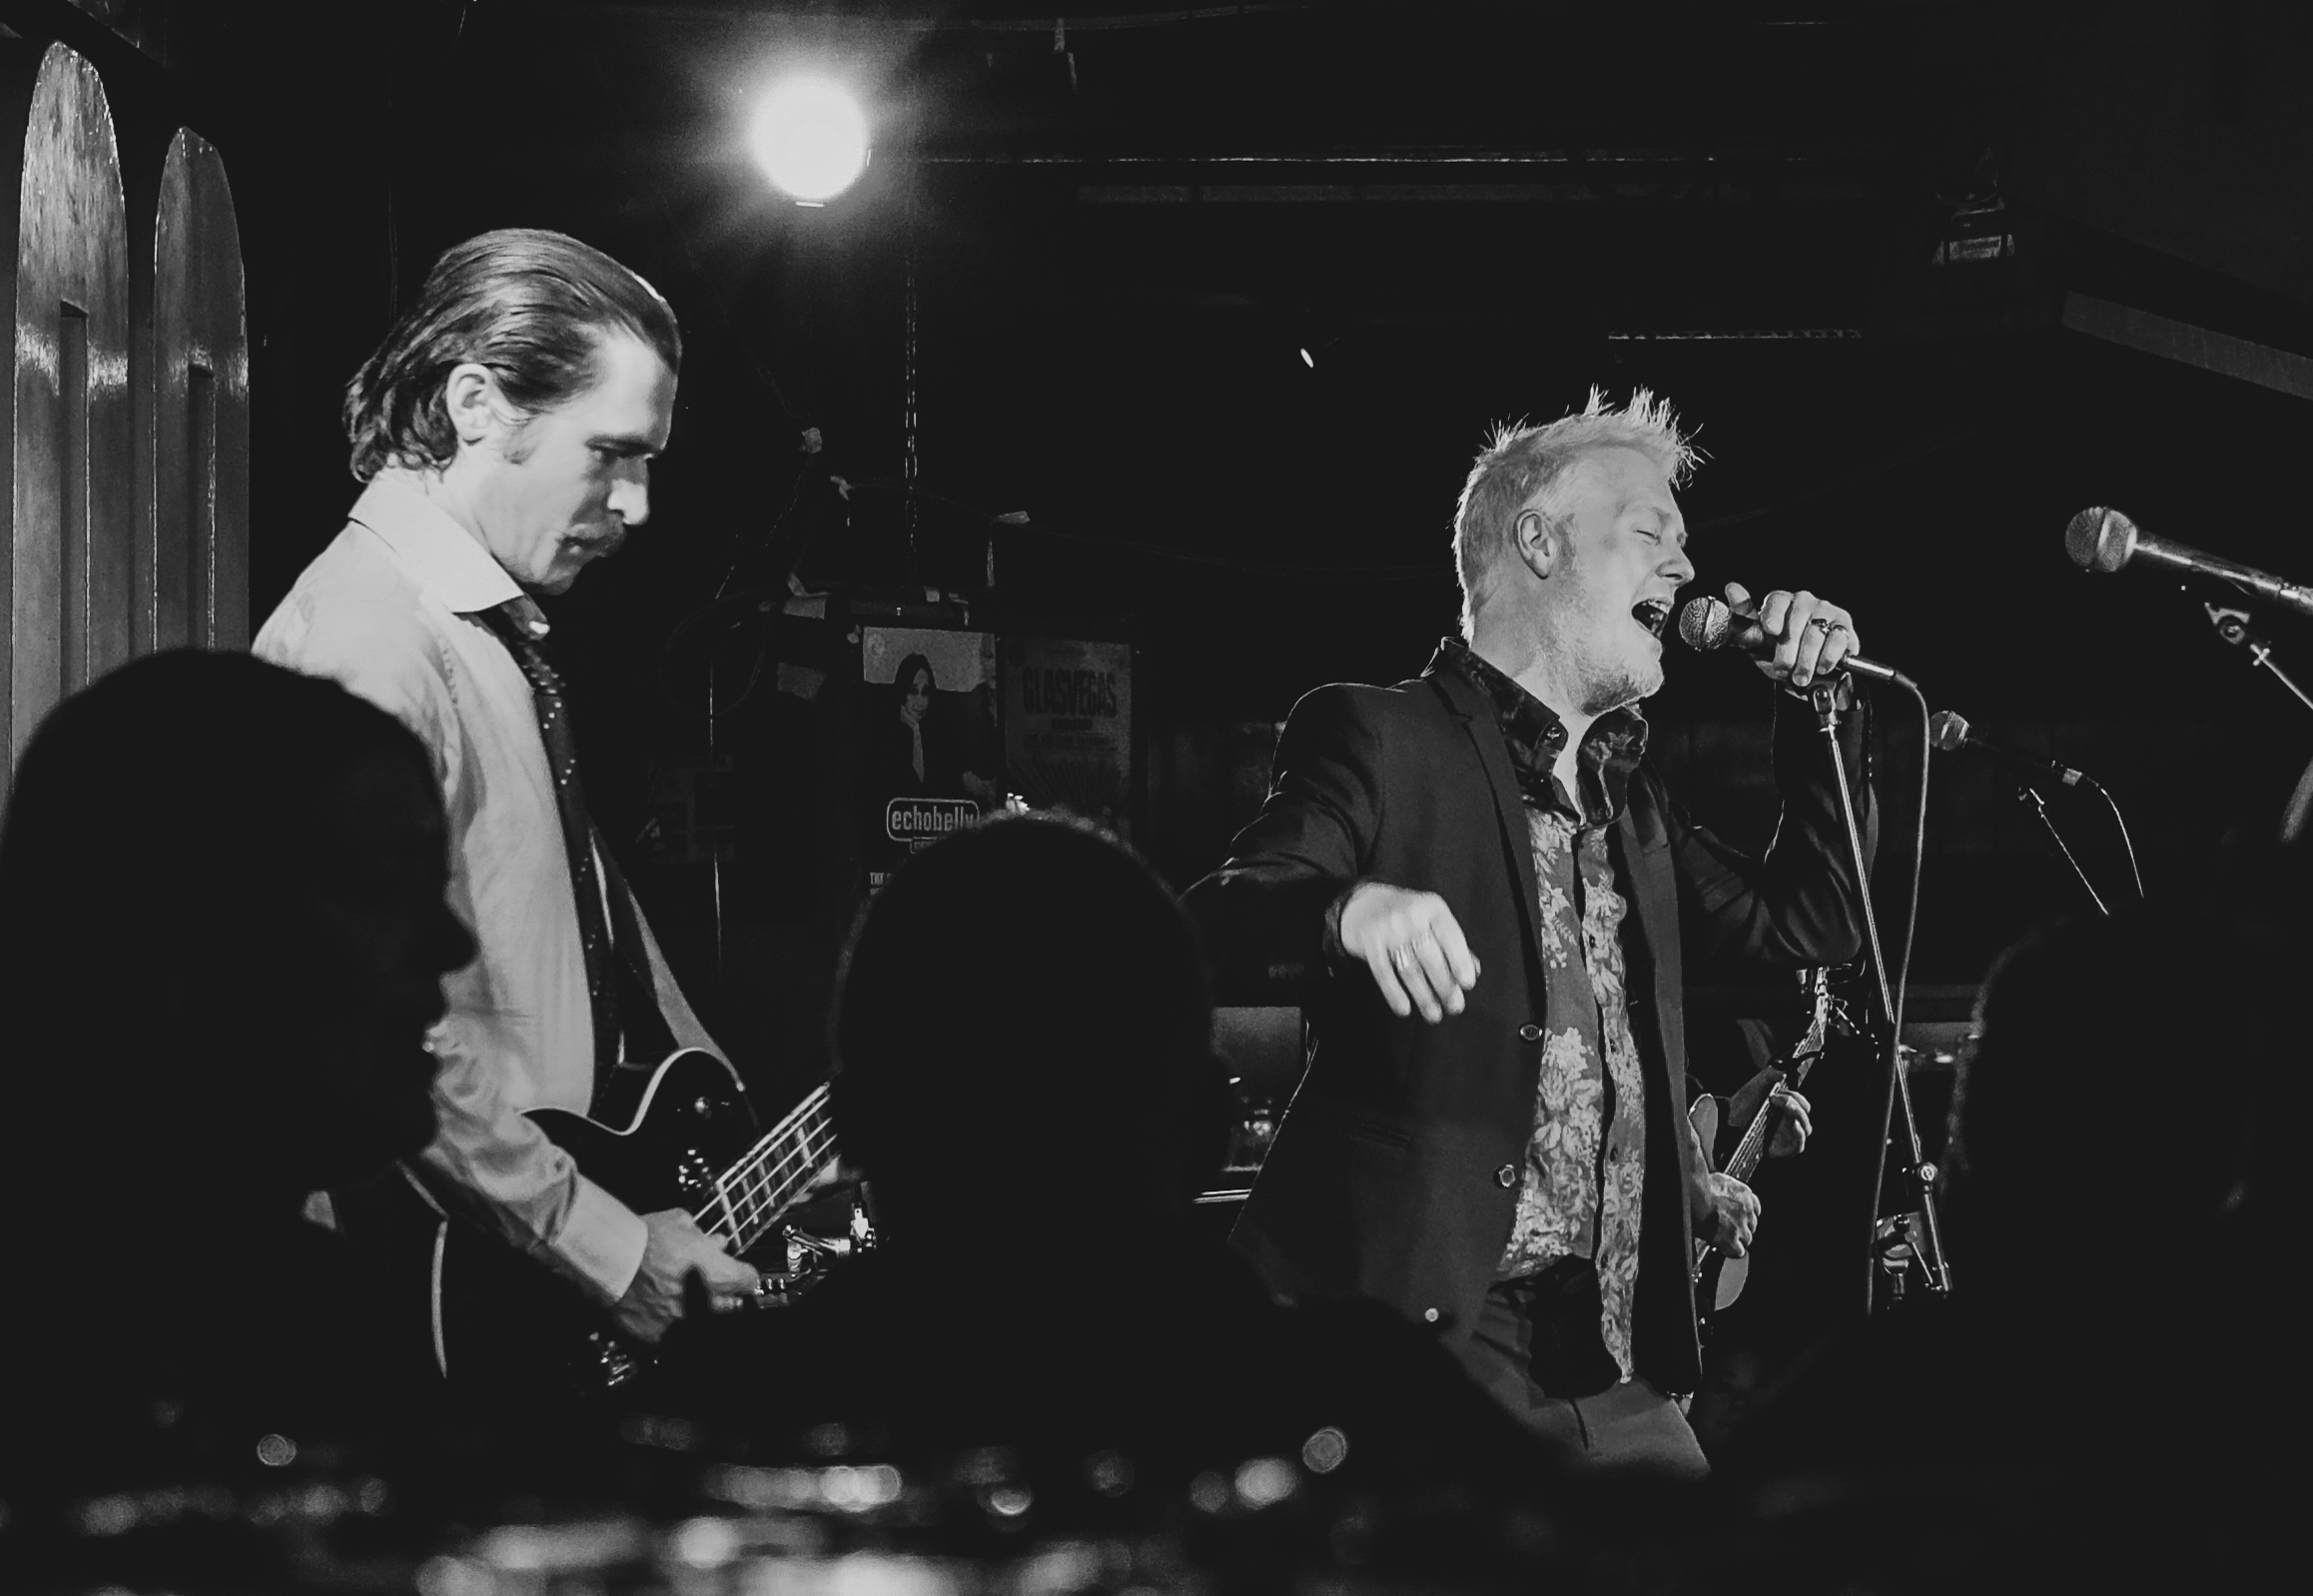 Danny Lowe and Stephen Jones of Babybird live at the 100 Club November 2019